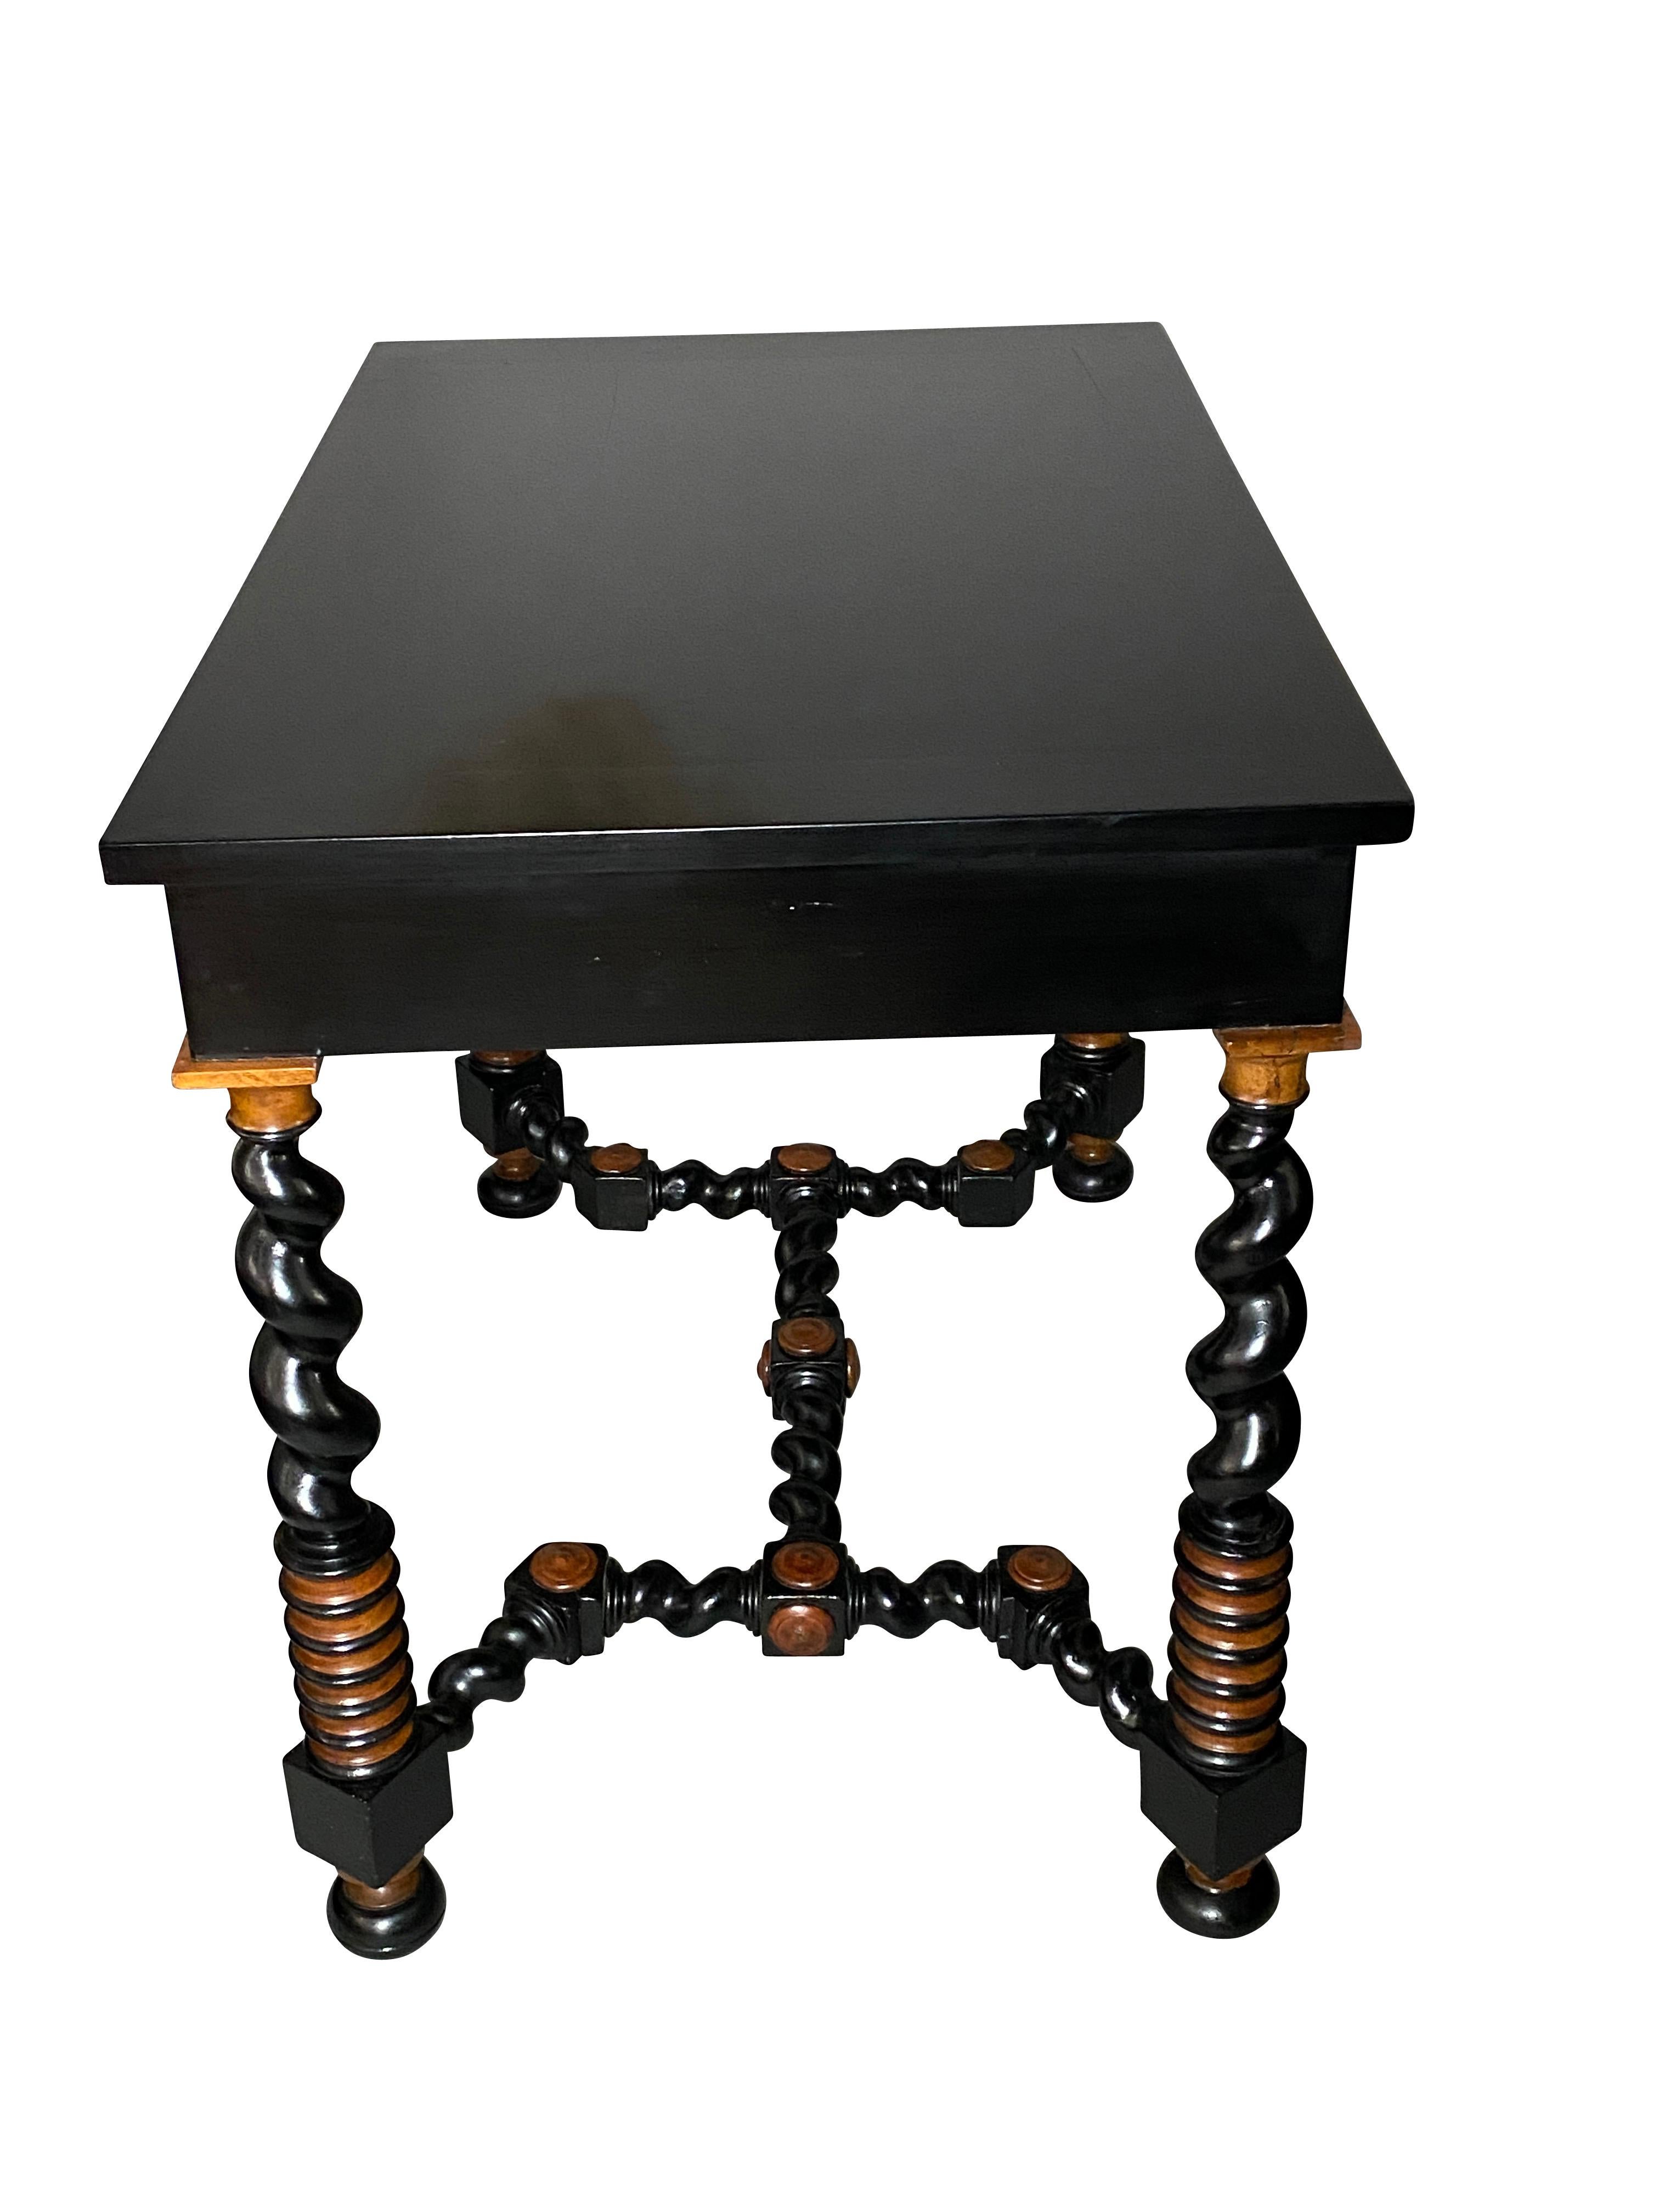 European Victorian Ebonized and Fruitwood Table